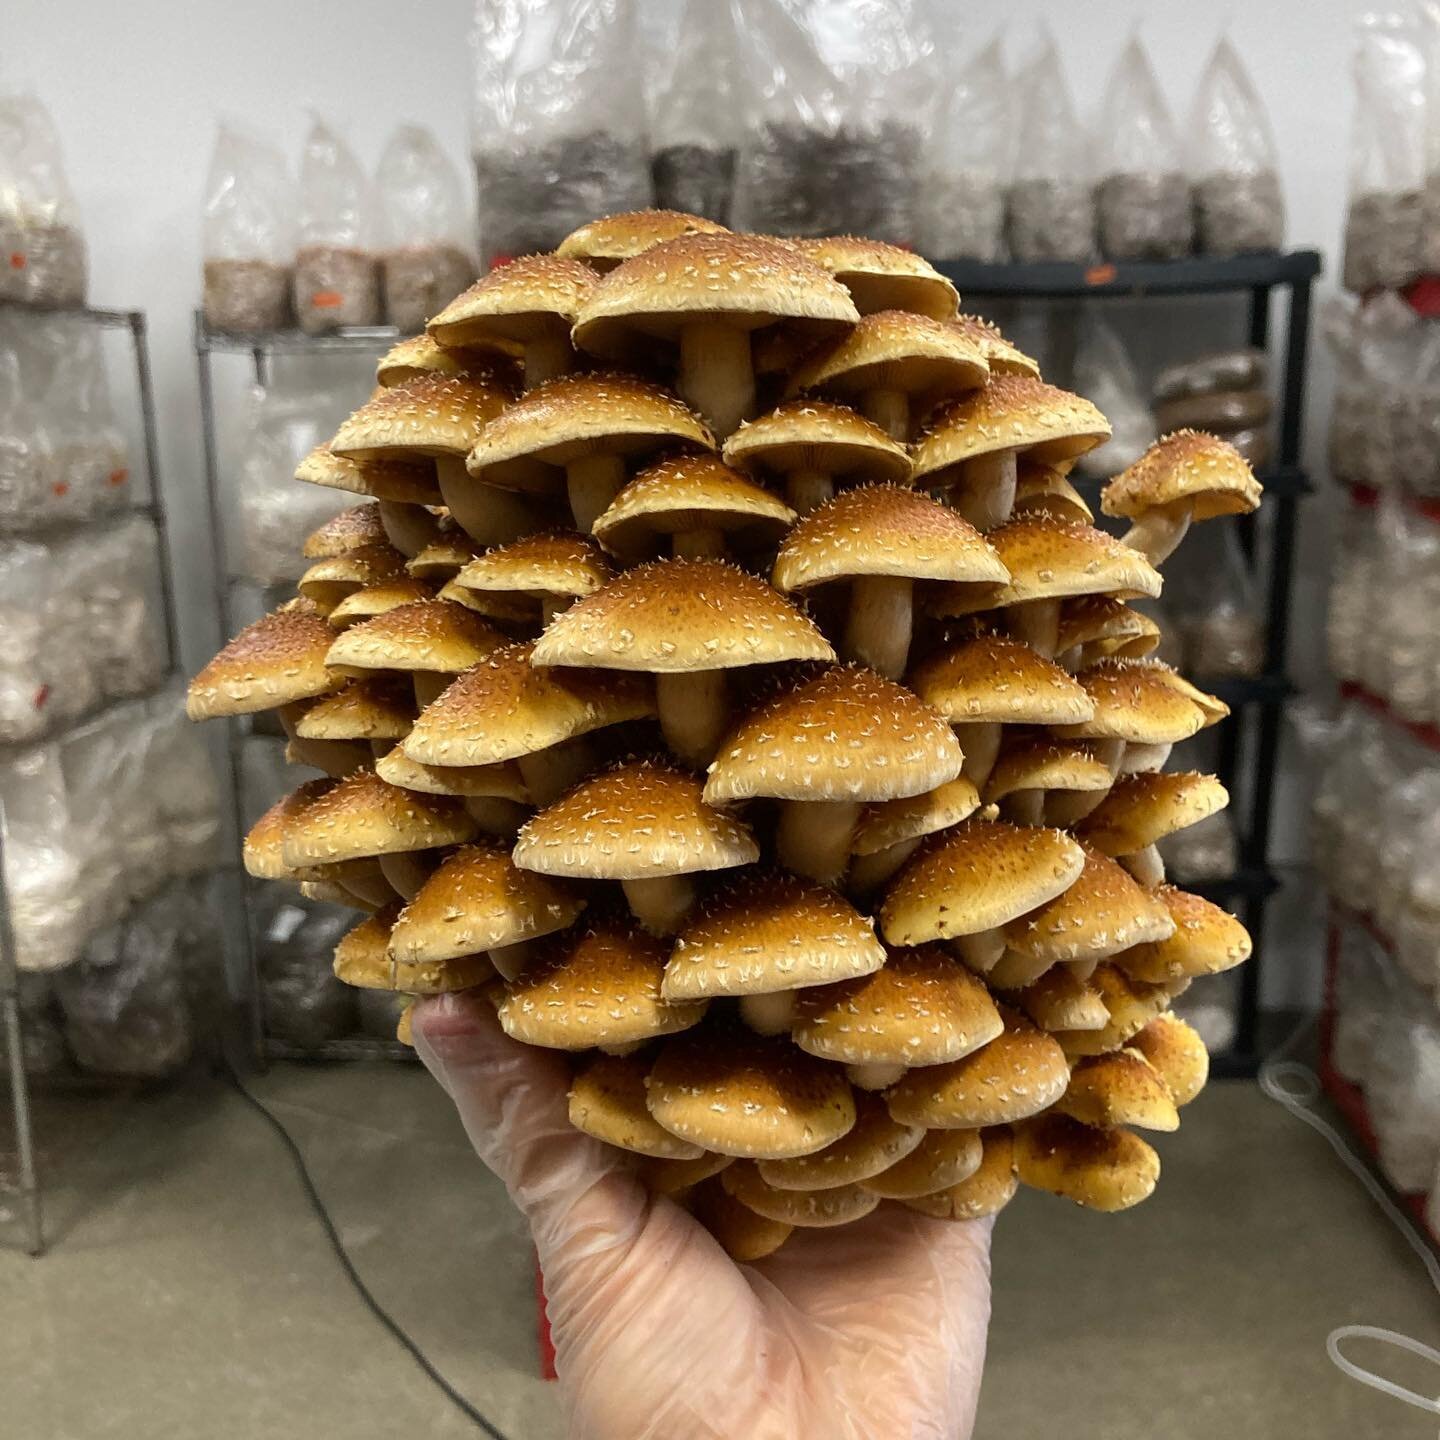 A big goal of ours this year has been to trial new and different varieties, like these chestnut mushrooms.

Every variety of mushroom has different requirements, whether they be temperature, humidity, oxygen levels, colonization time, etc.

These guy